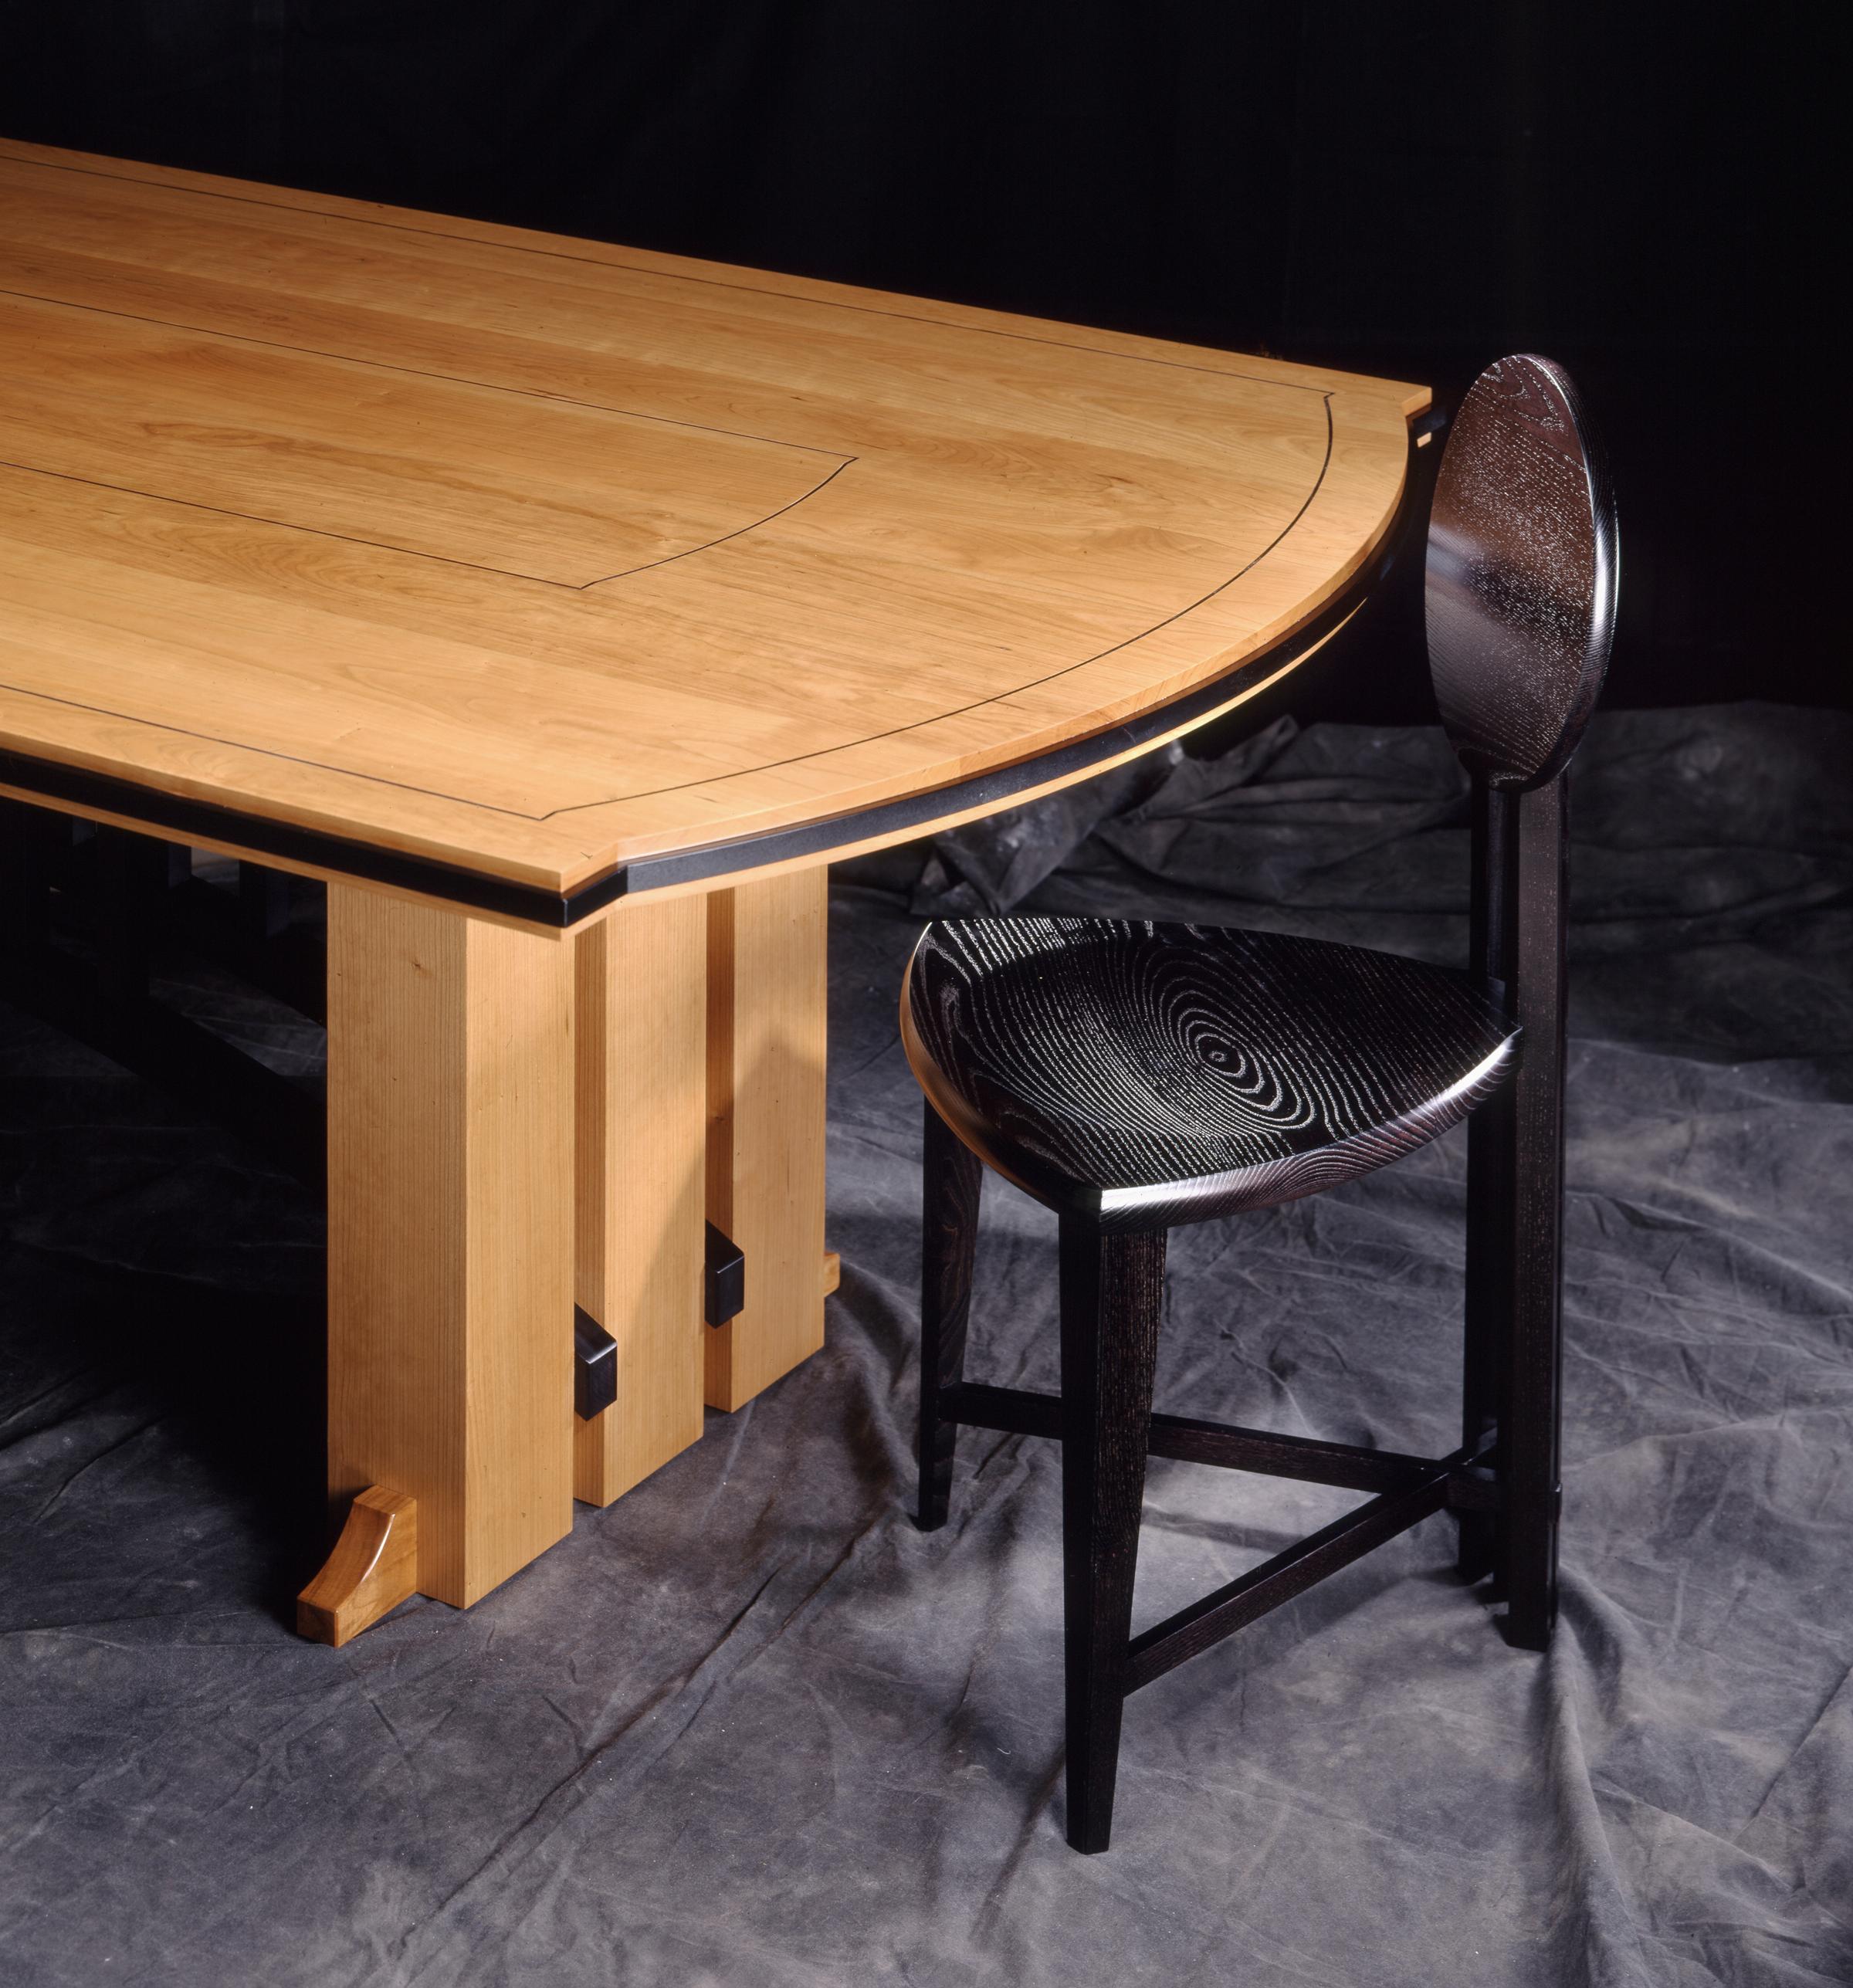 Named after the famous Gramercy Tavern Restaurant in NYC, a table like this resides in the private dining room at the restaurant. The design of this table or desk is well suited in large scale with rectangular, racetrack and boat-shape tops